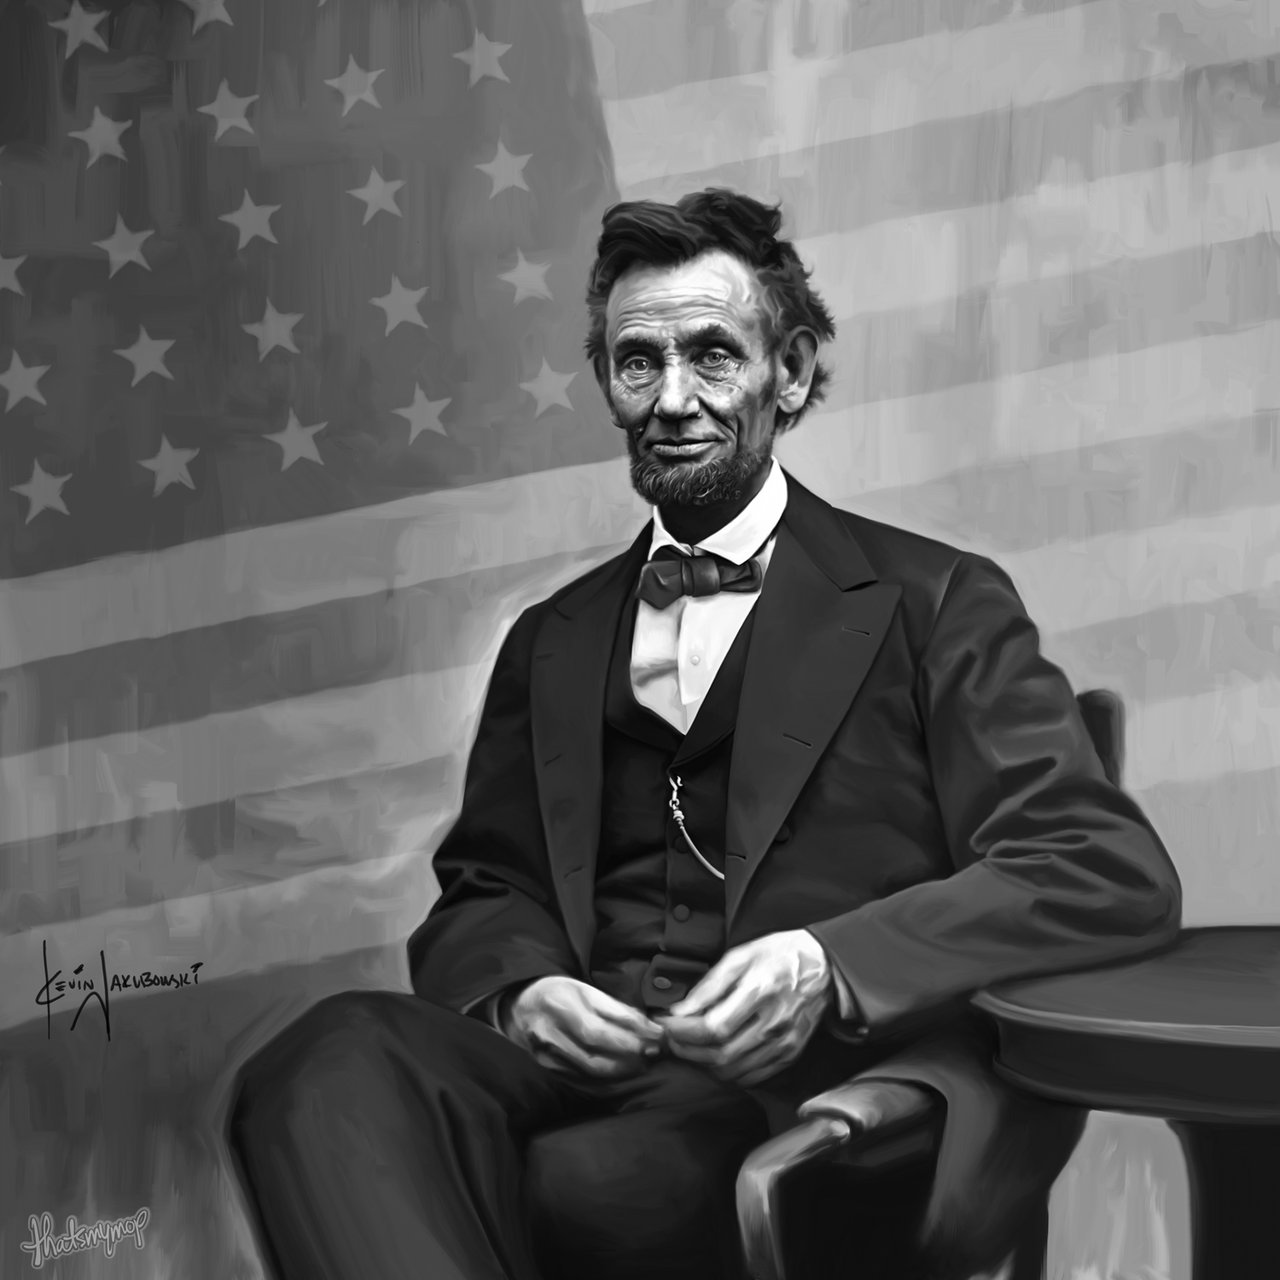 HD abraham lincoln wallpapers  Peakpx